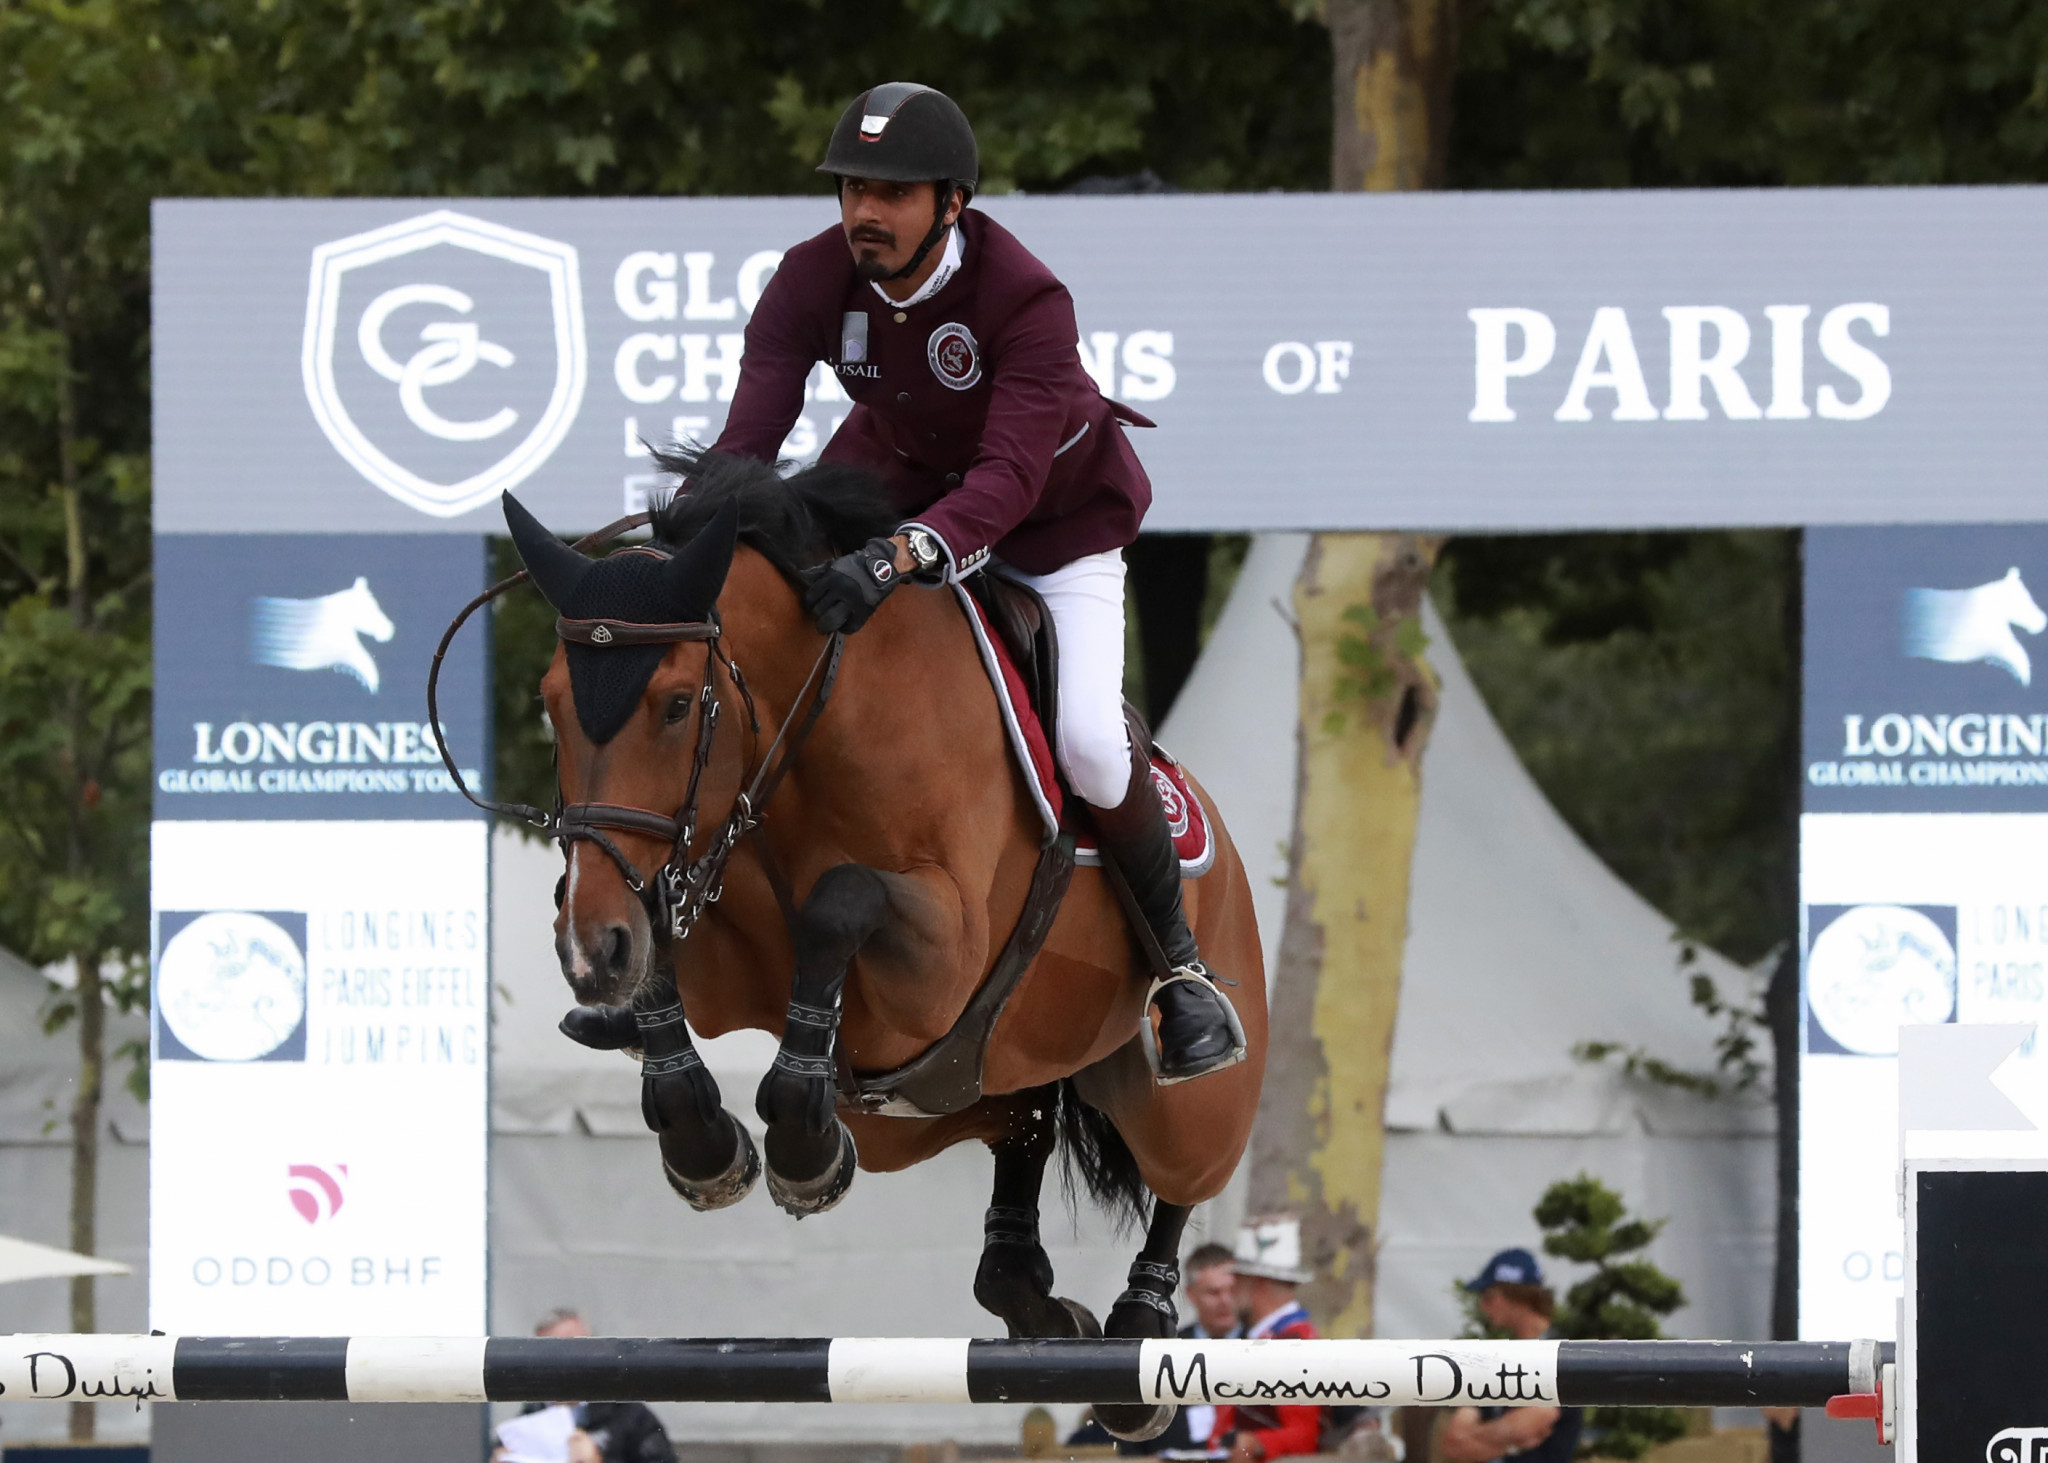 Qatar's Sheikh Ali Al Thani was one of two riders to test for a banned substance, leading to Morocco taking his nation's place at Tokyo 2020 ©Getty Images